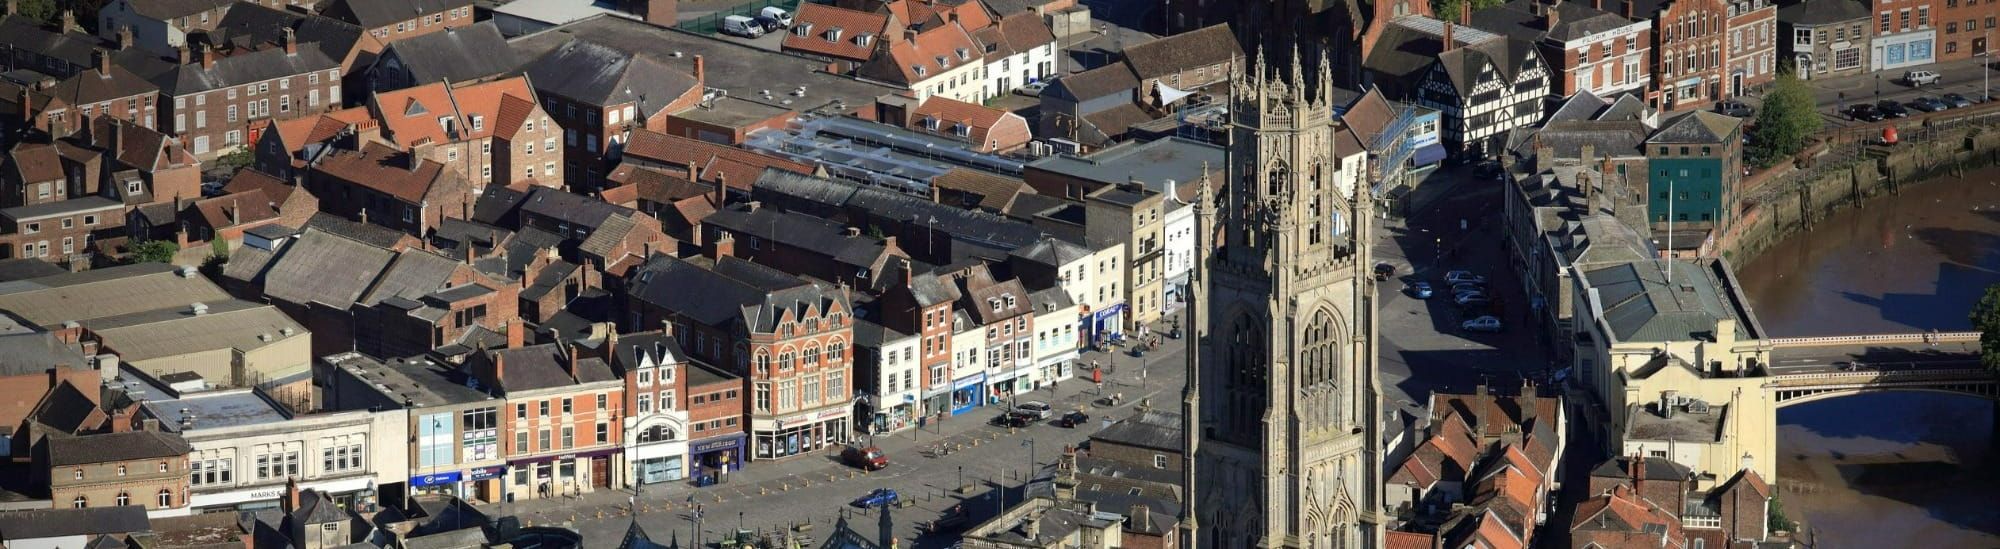 Photo of Boston, Lincolnshire with St Botolph's Church in background